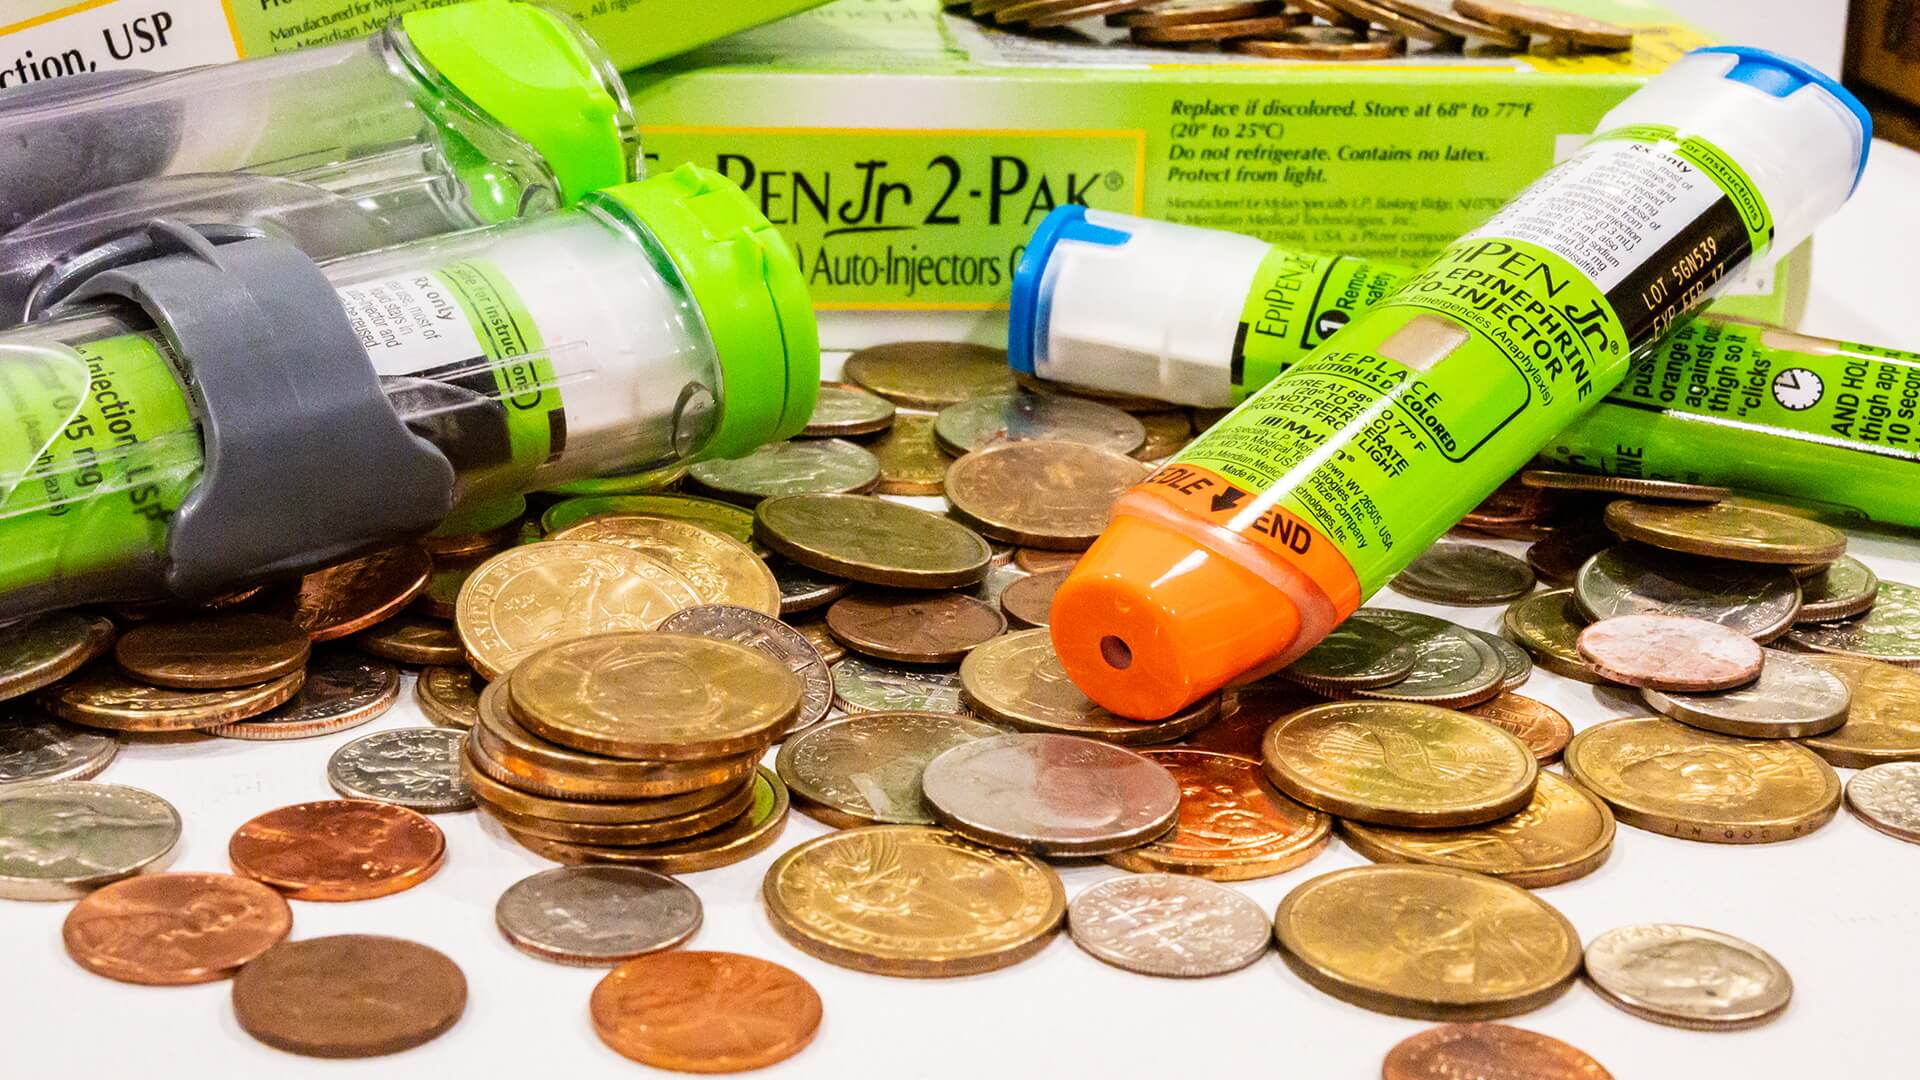 Price Gouging: EpiPen Injectors among coins